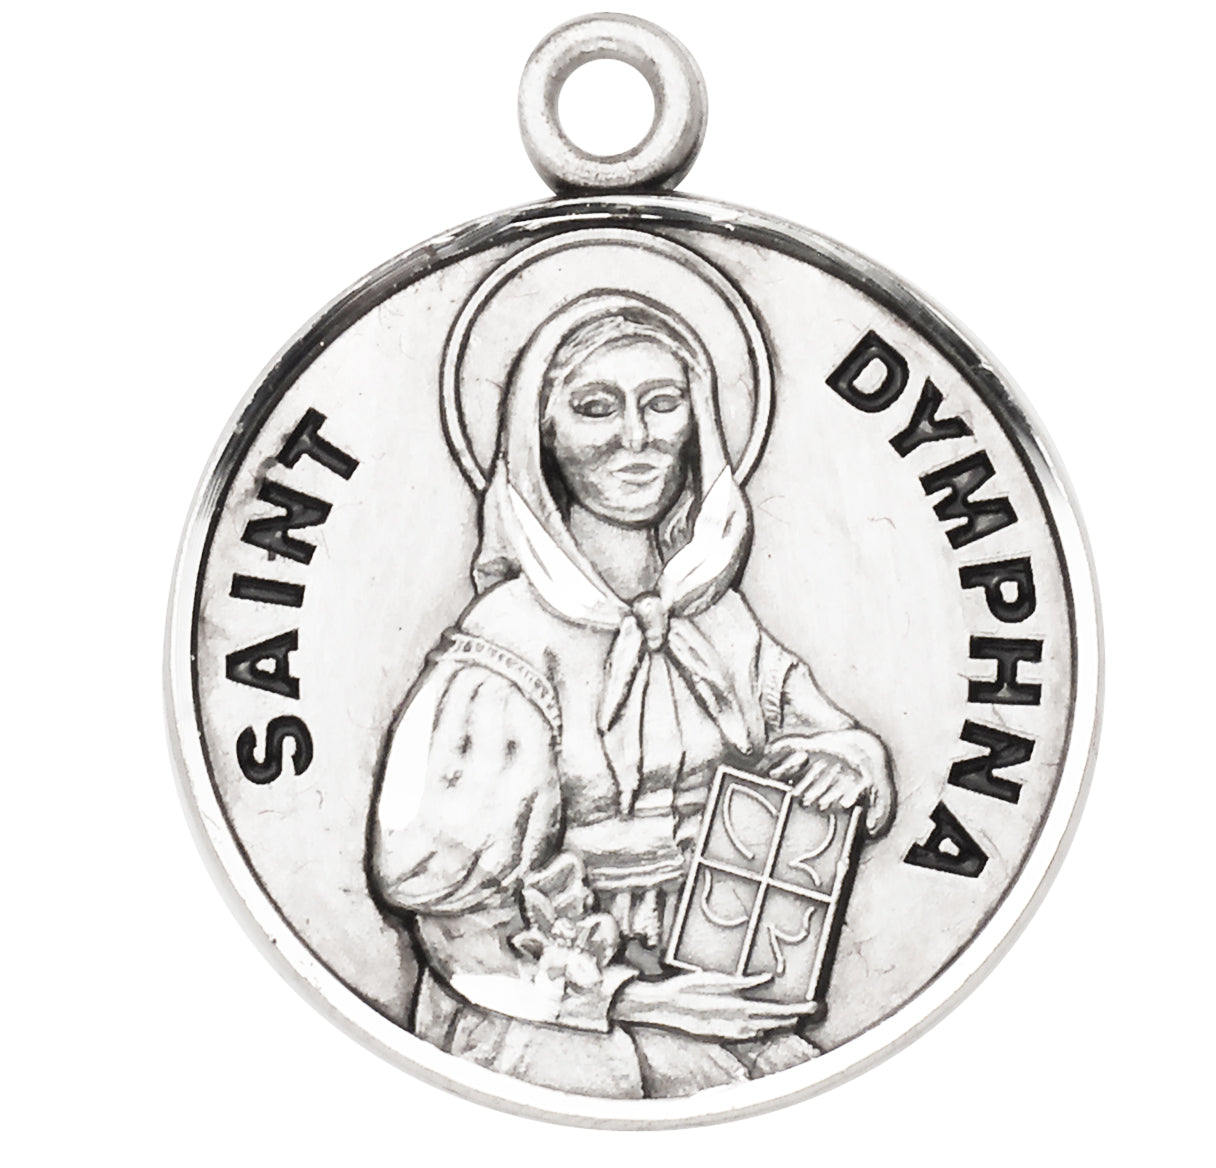 St. Dymphna Sterling Silver Medal Necklace